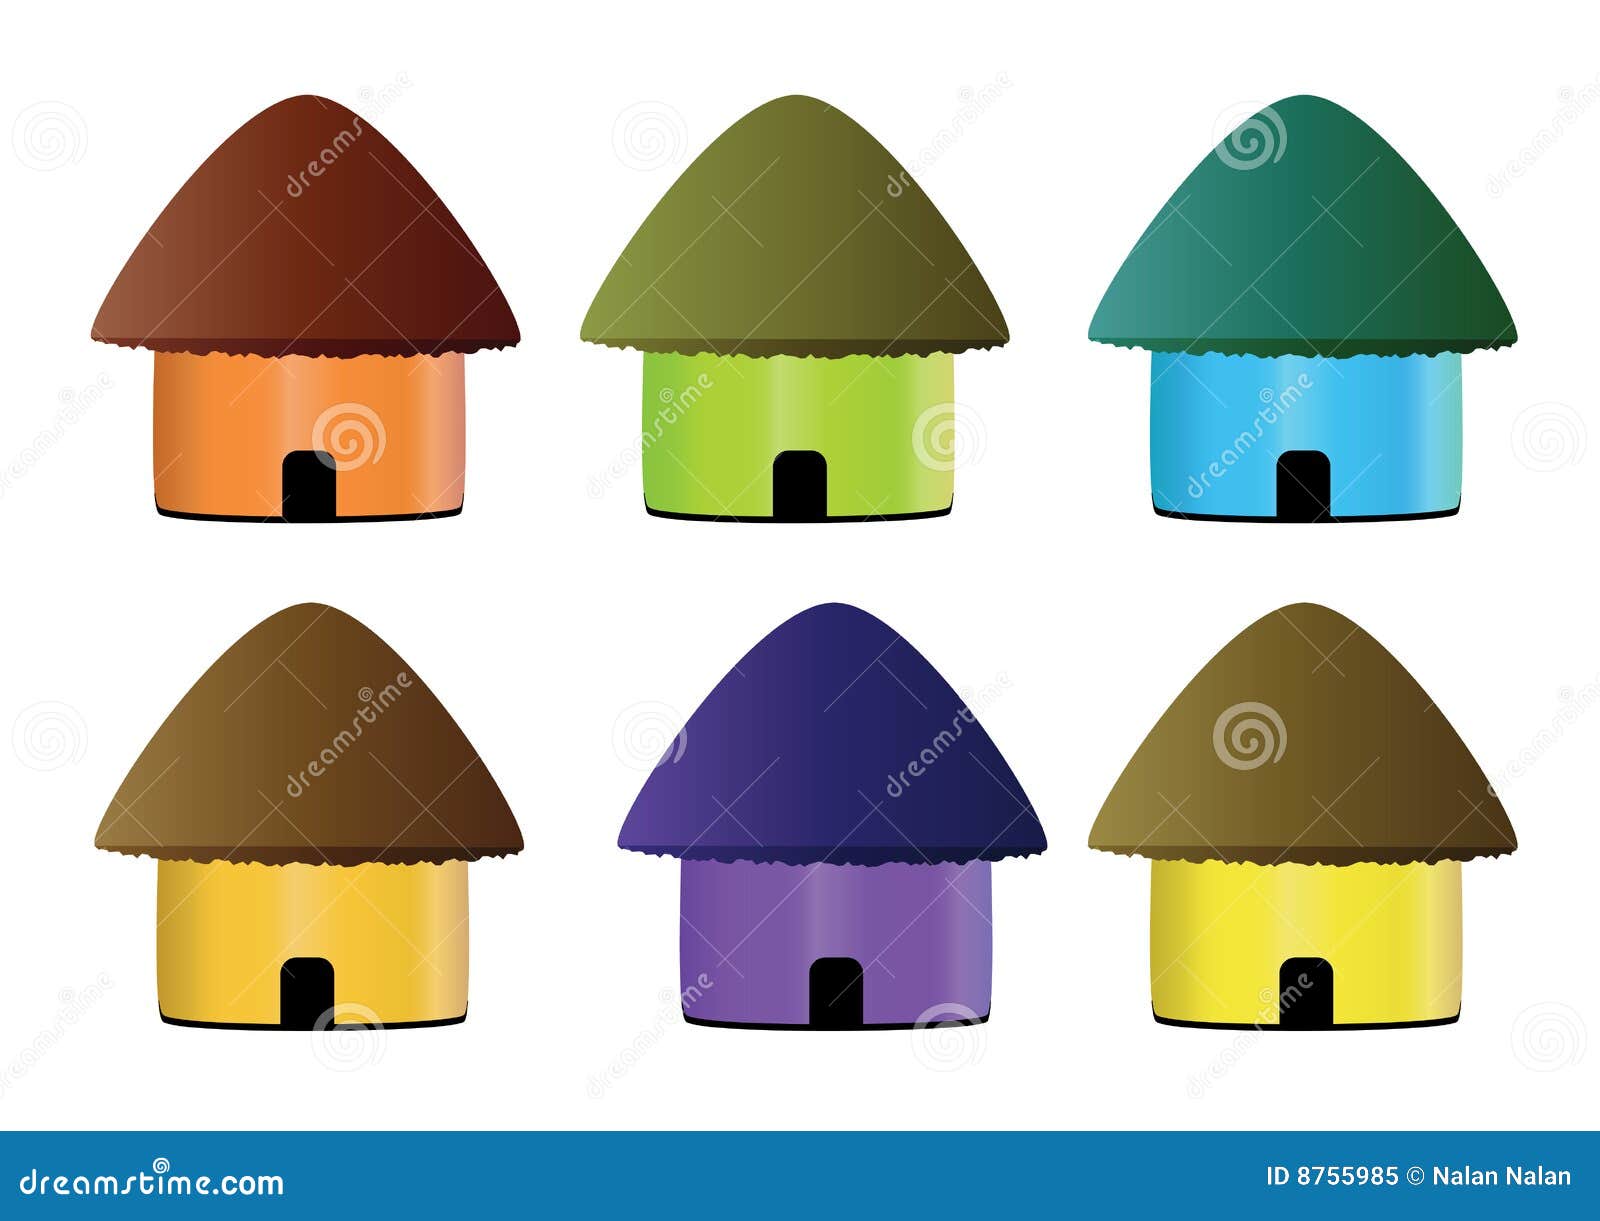 clipart images of hut - photo #16